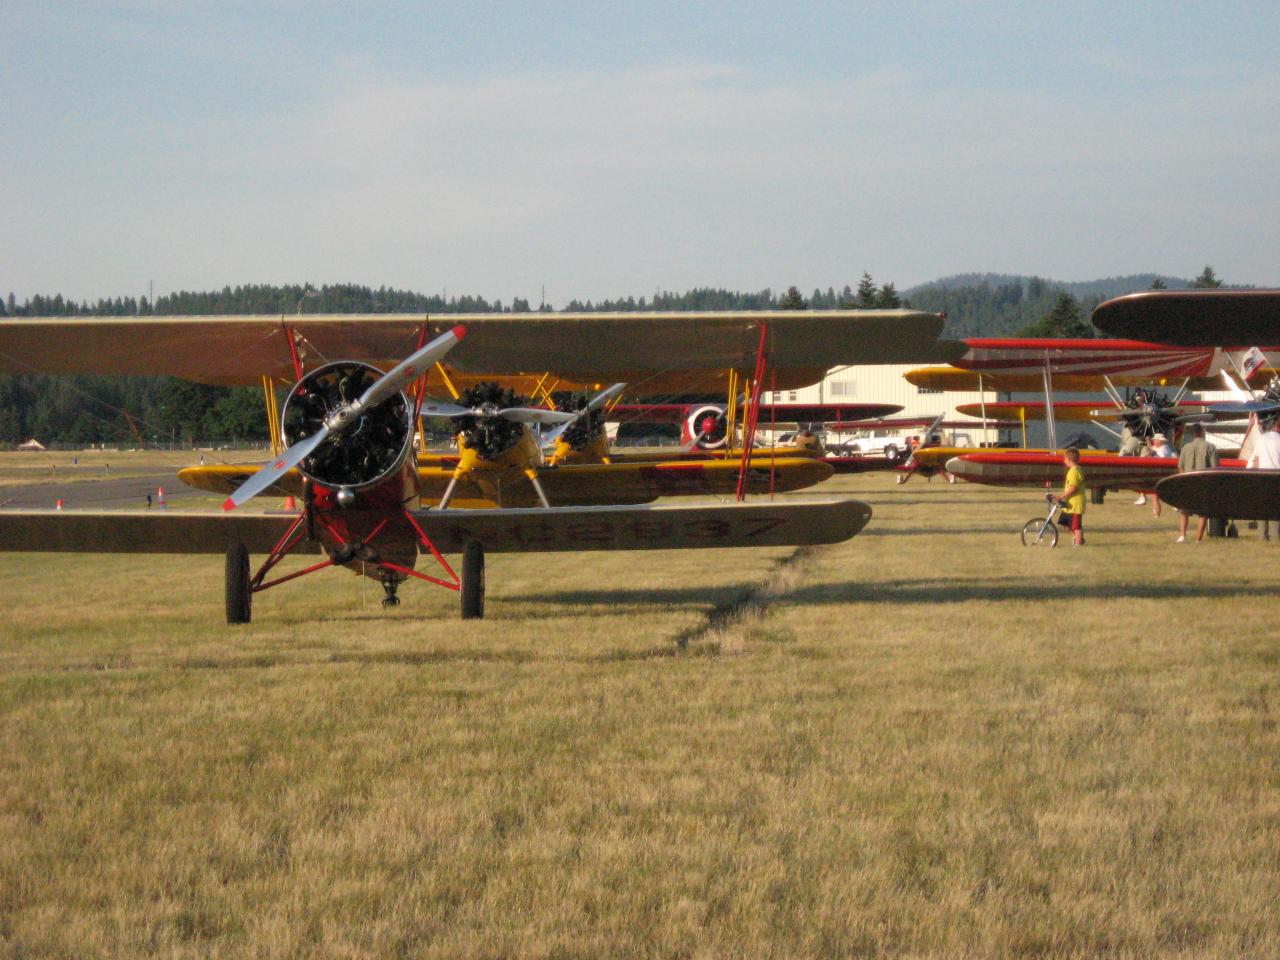 Register for the NW Biplane Fly-In